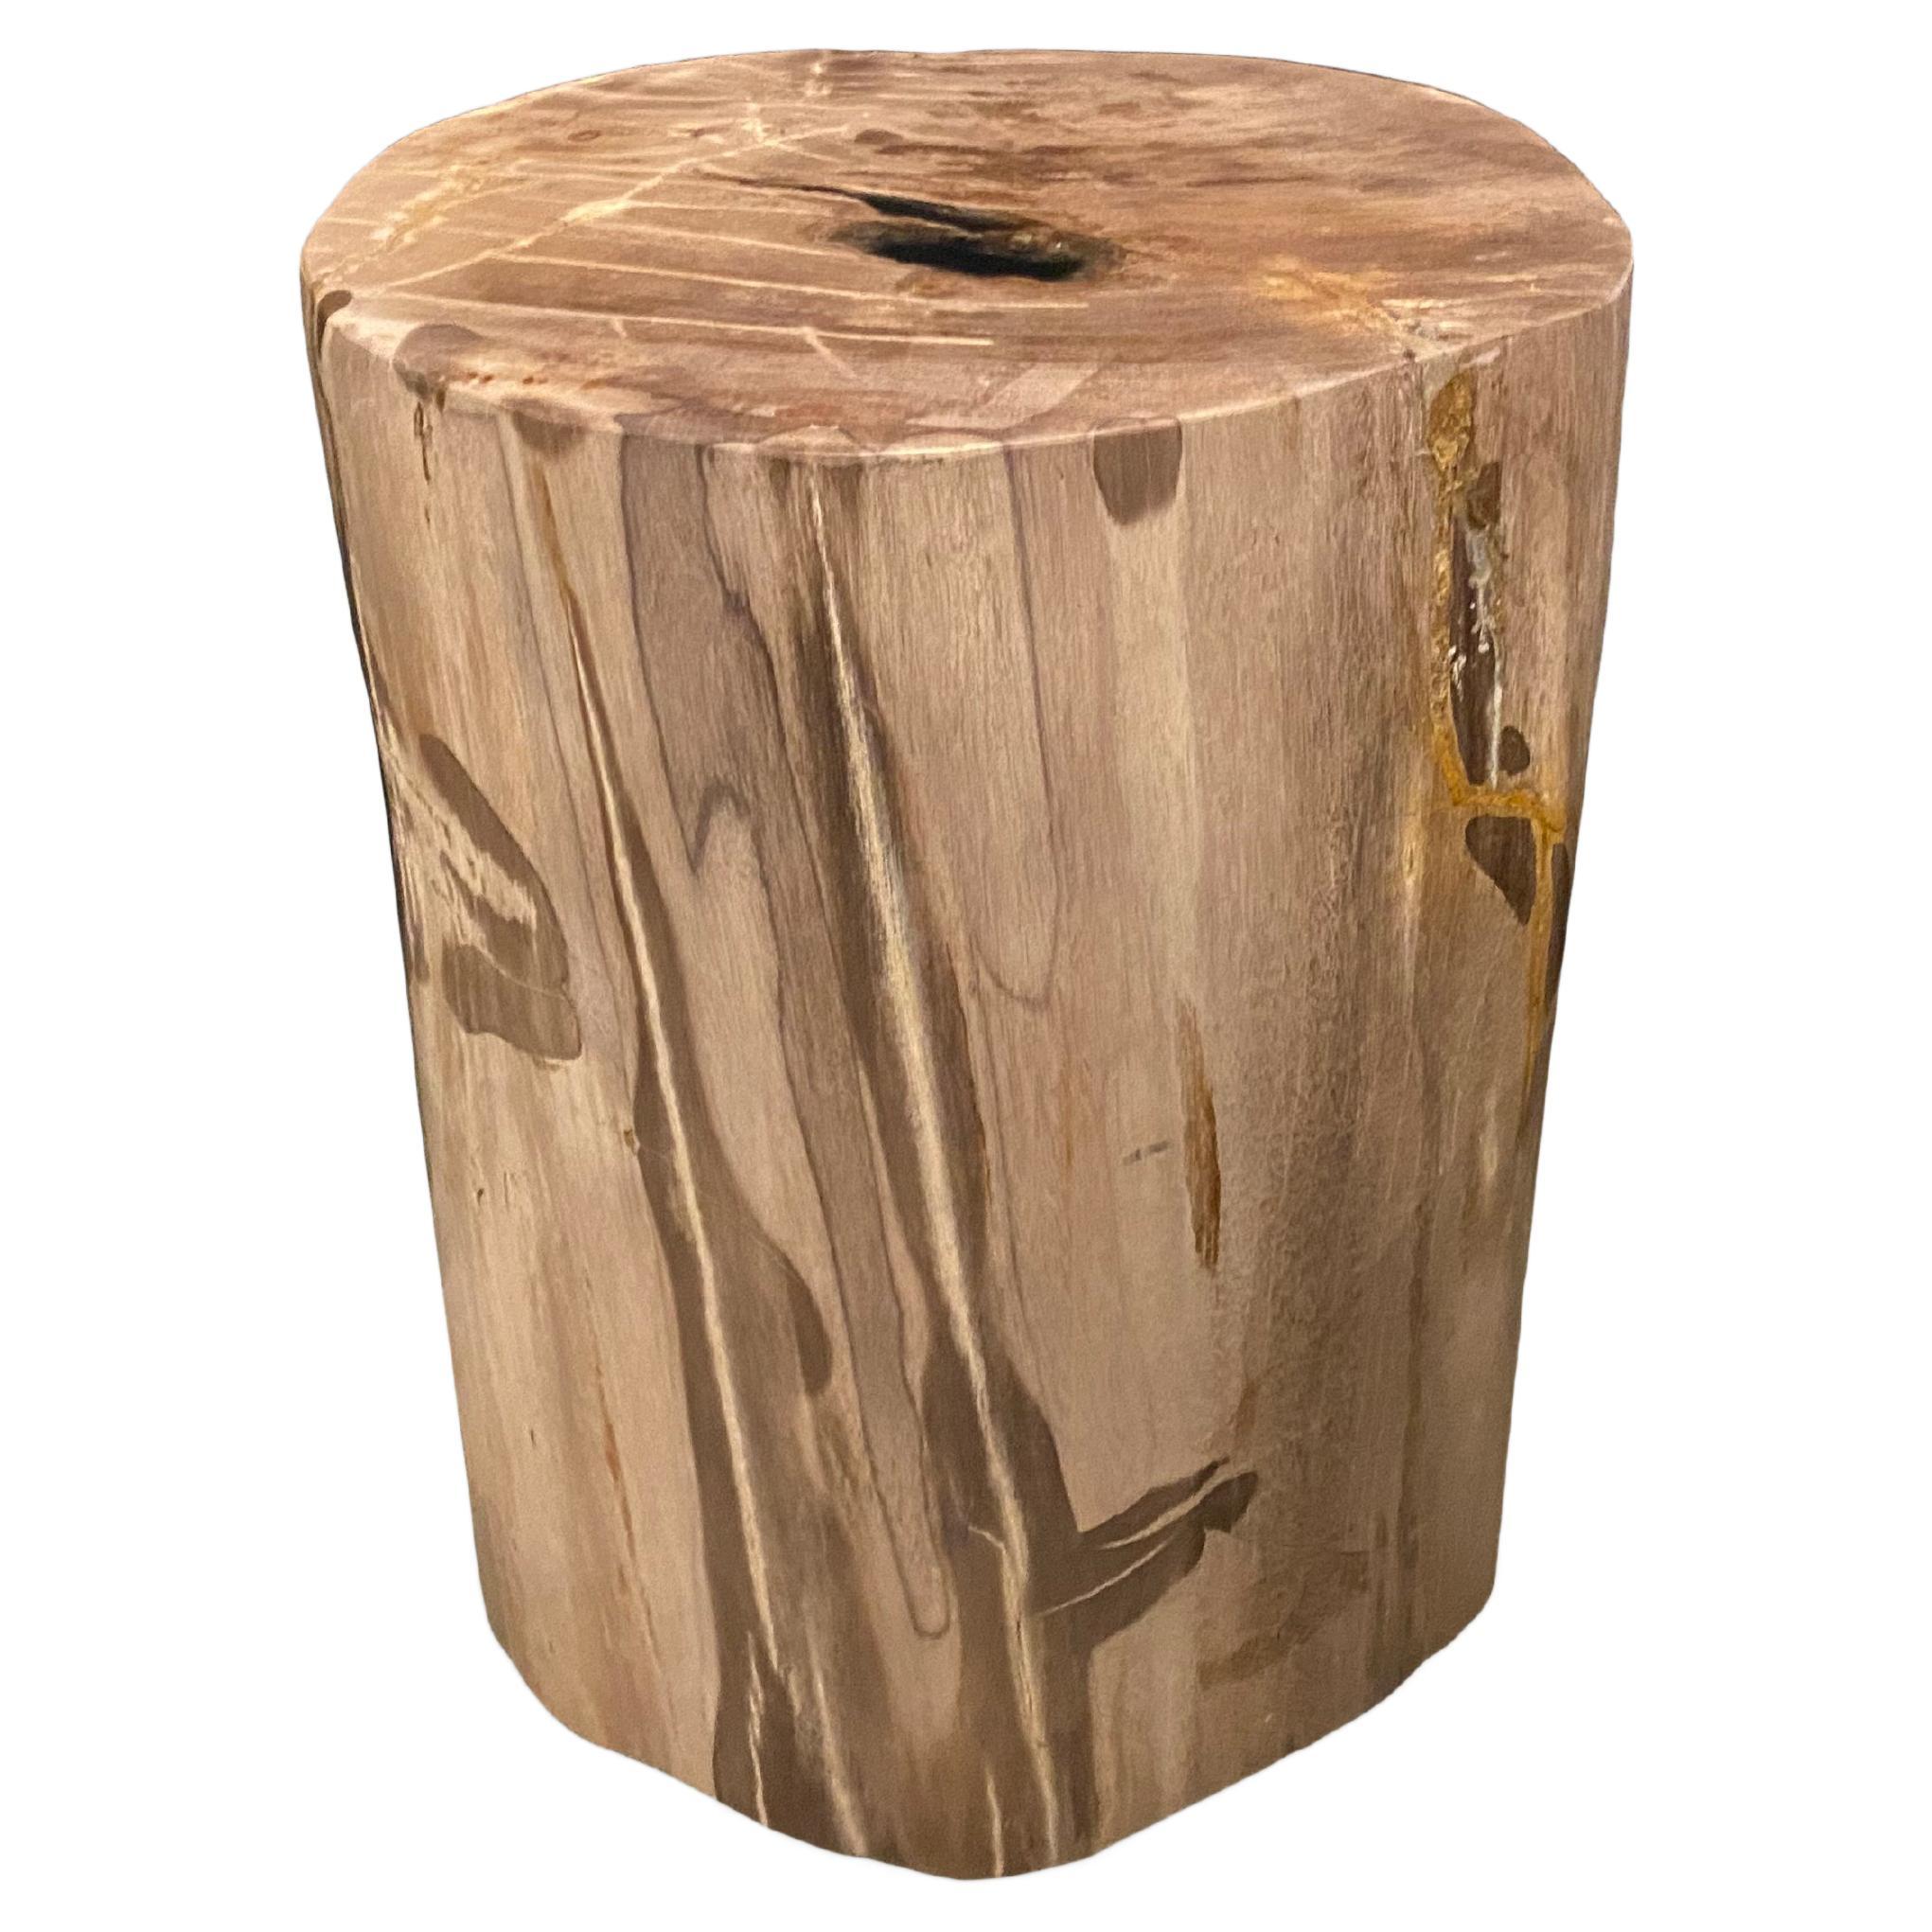 Andrianna Shamaris Minimalist Petrified Wood Side Table with a Drop of Resin